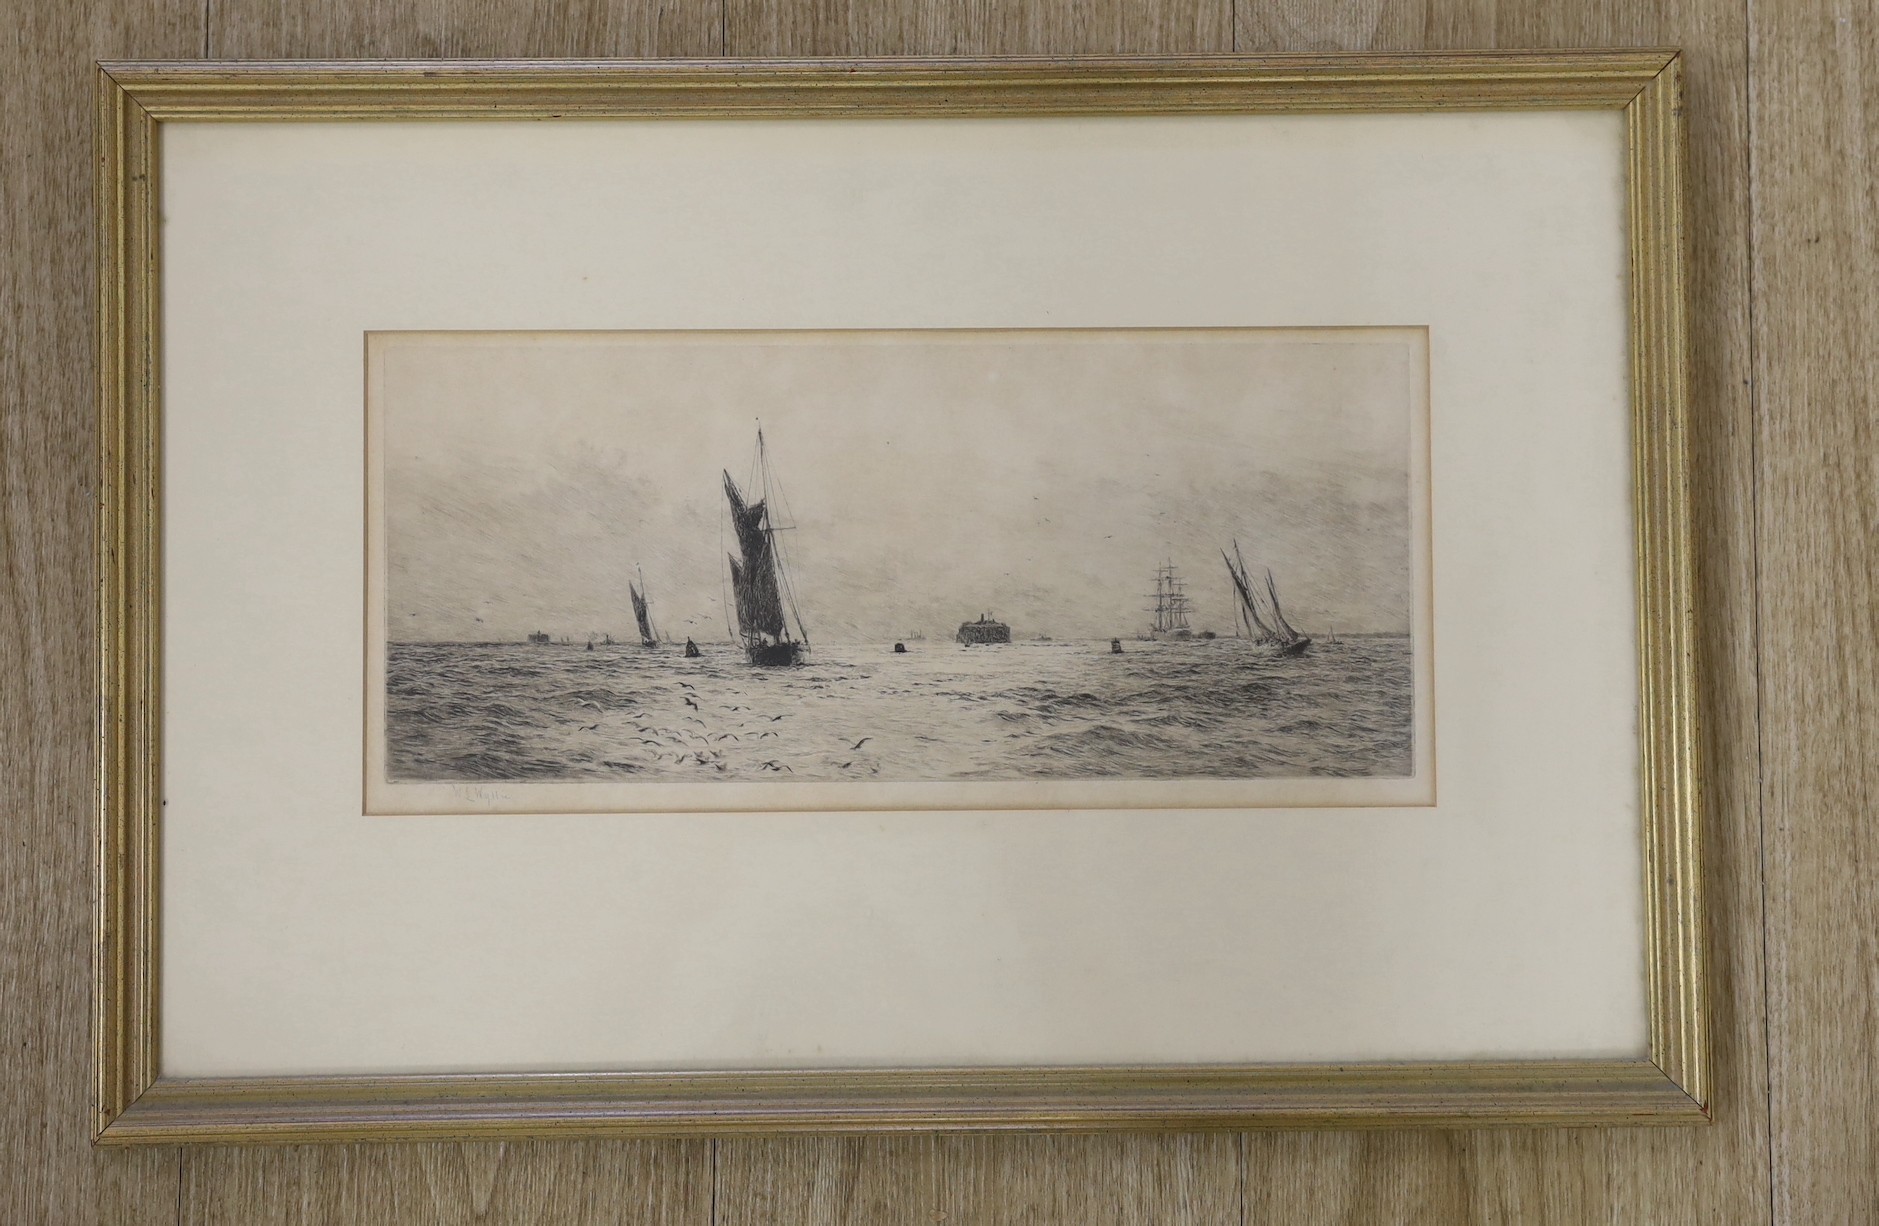 William Lionel Wyllie (1851-1931), etching, 'Shipping off Portsmouth', signed in pencil, 15 x 35cm